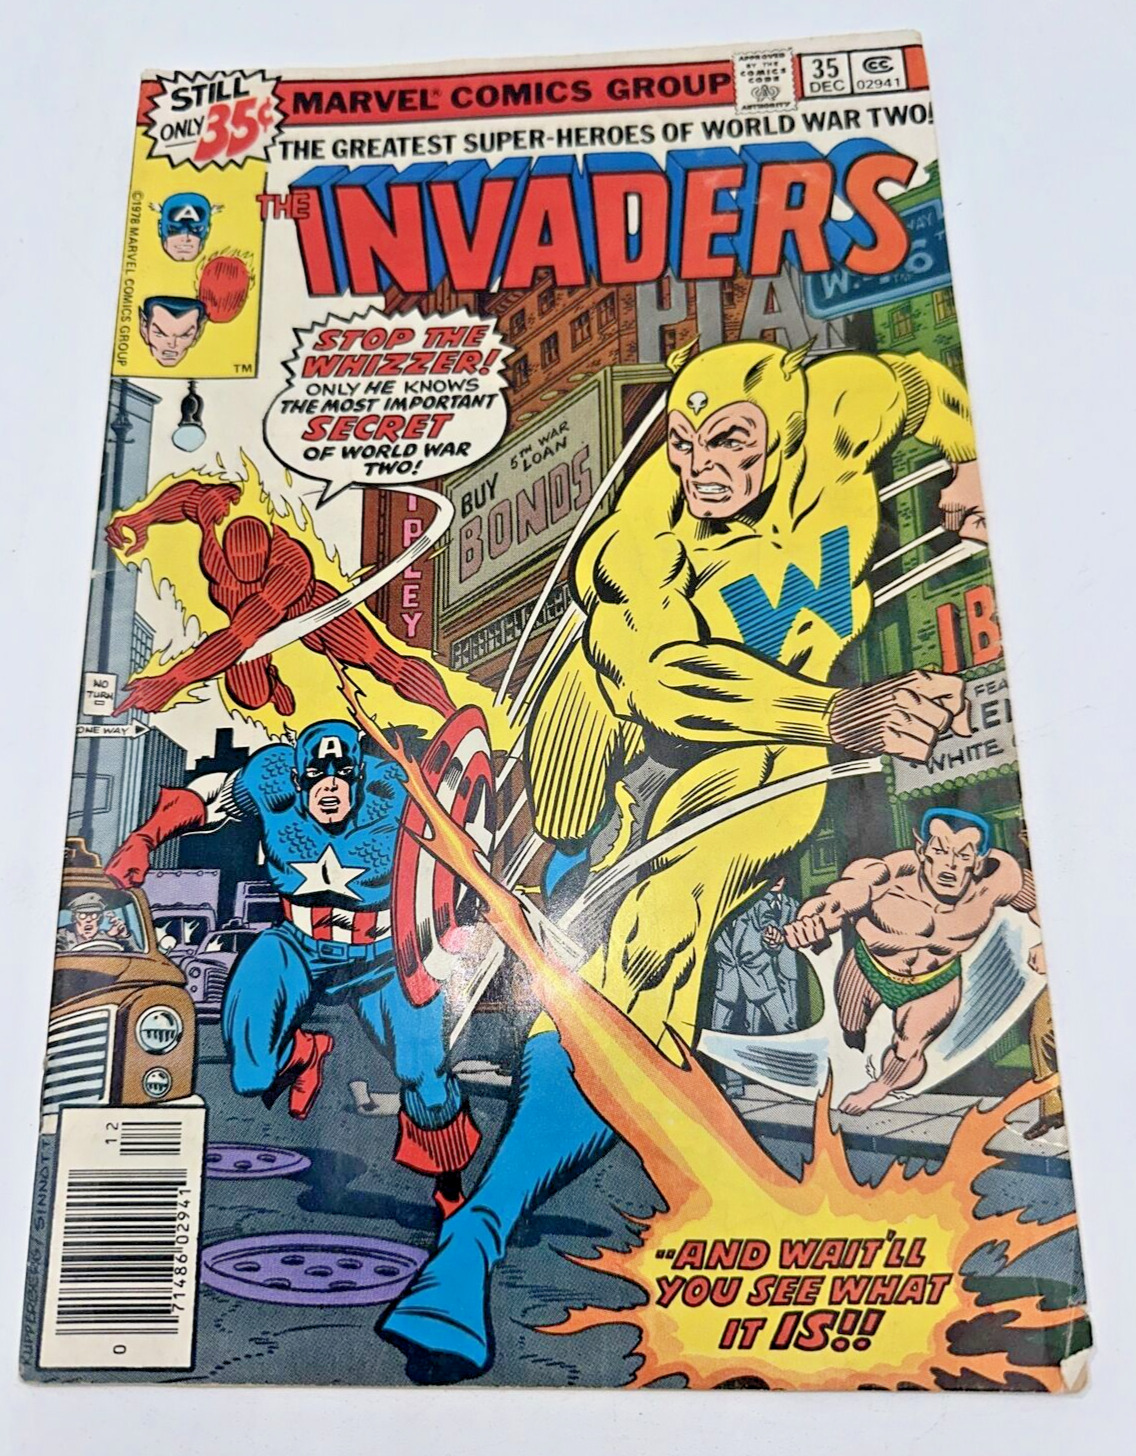 THE INVADERS #35 * Marvel Comics * 1978 Comic Book - The Whizzer PLEASE READ